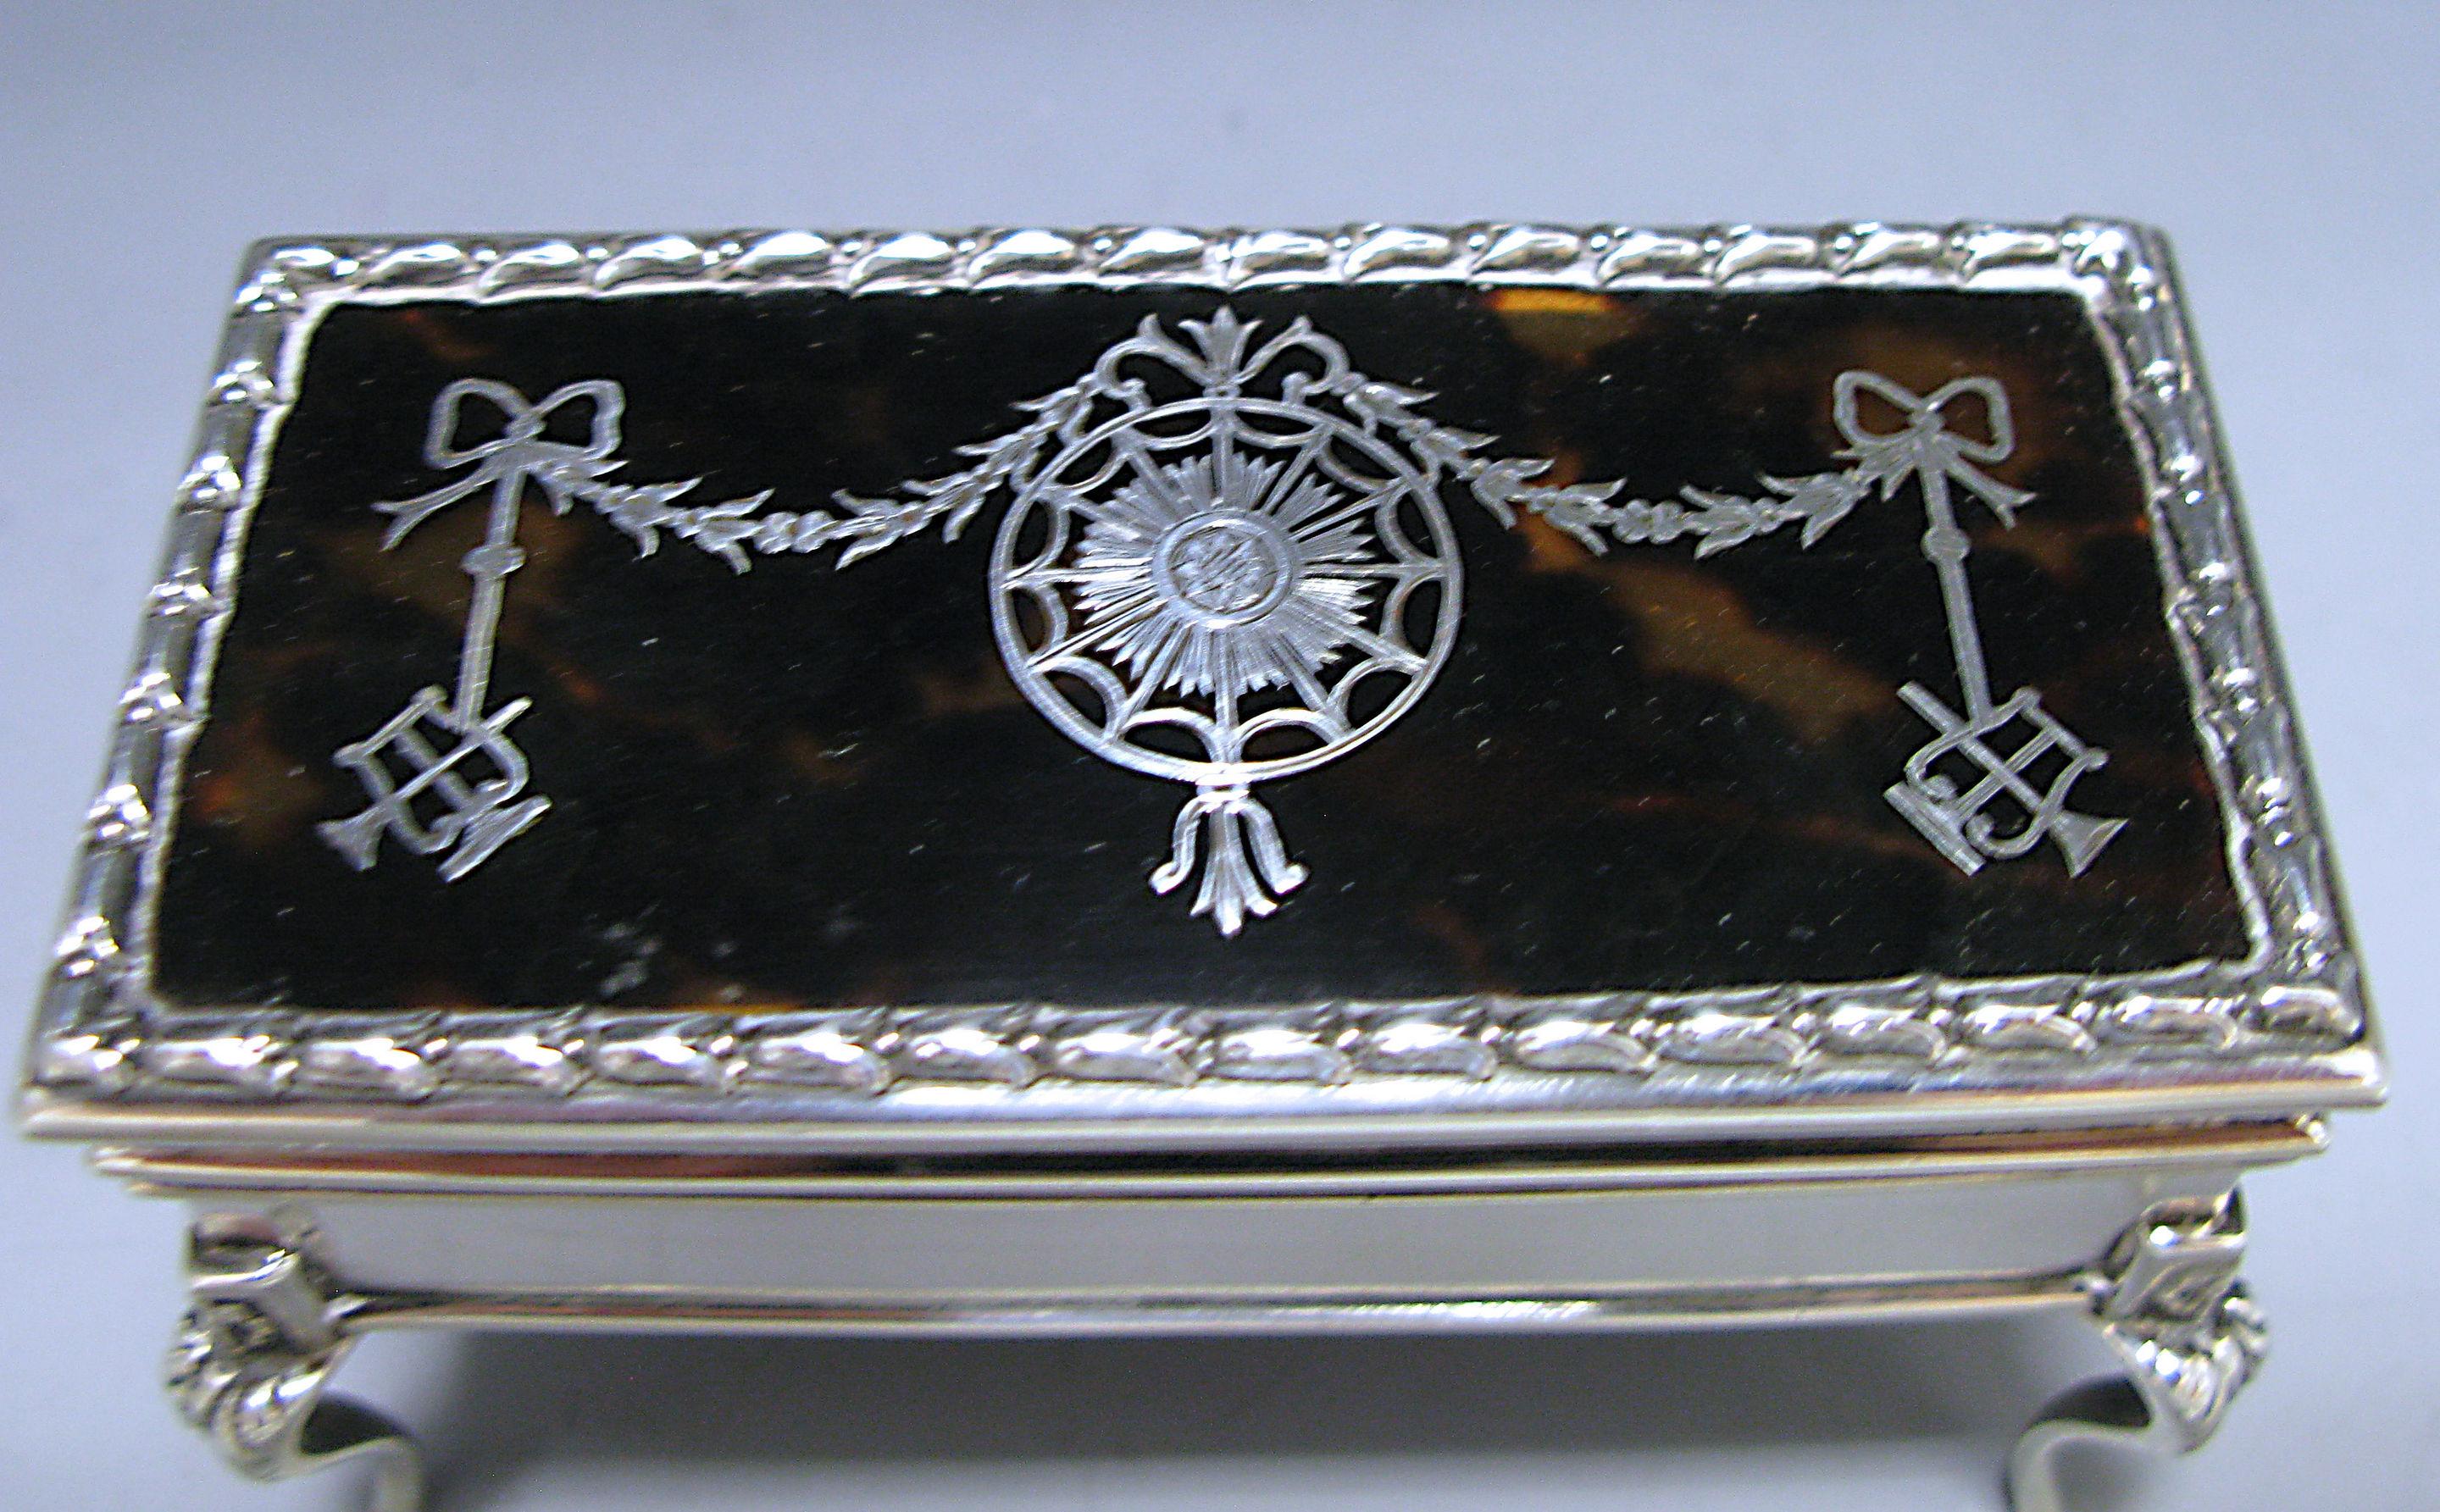 An impressive antique George V silver and tortoiseshell trinket / jewelry box, of rectangular form. The hinged lid has an impressive tortoiseshell panel ornamented with silver pique work depicting bows, swags and a cupid lyre. The box is supported